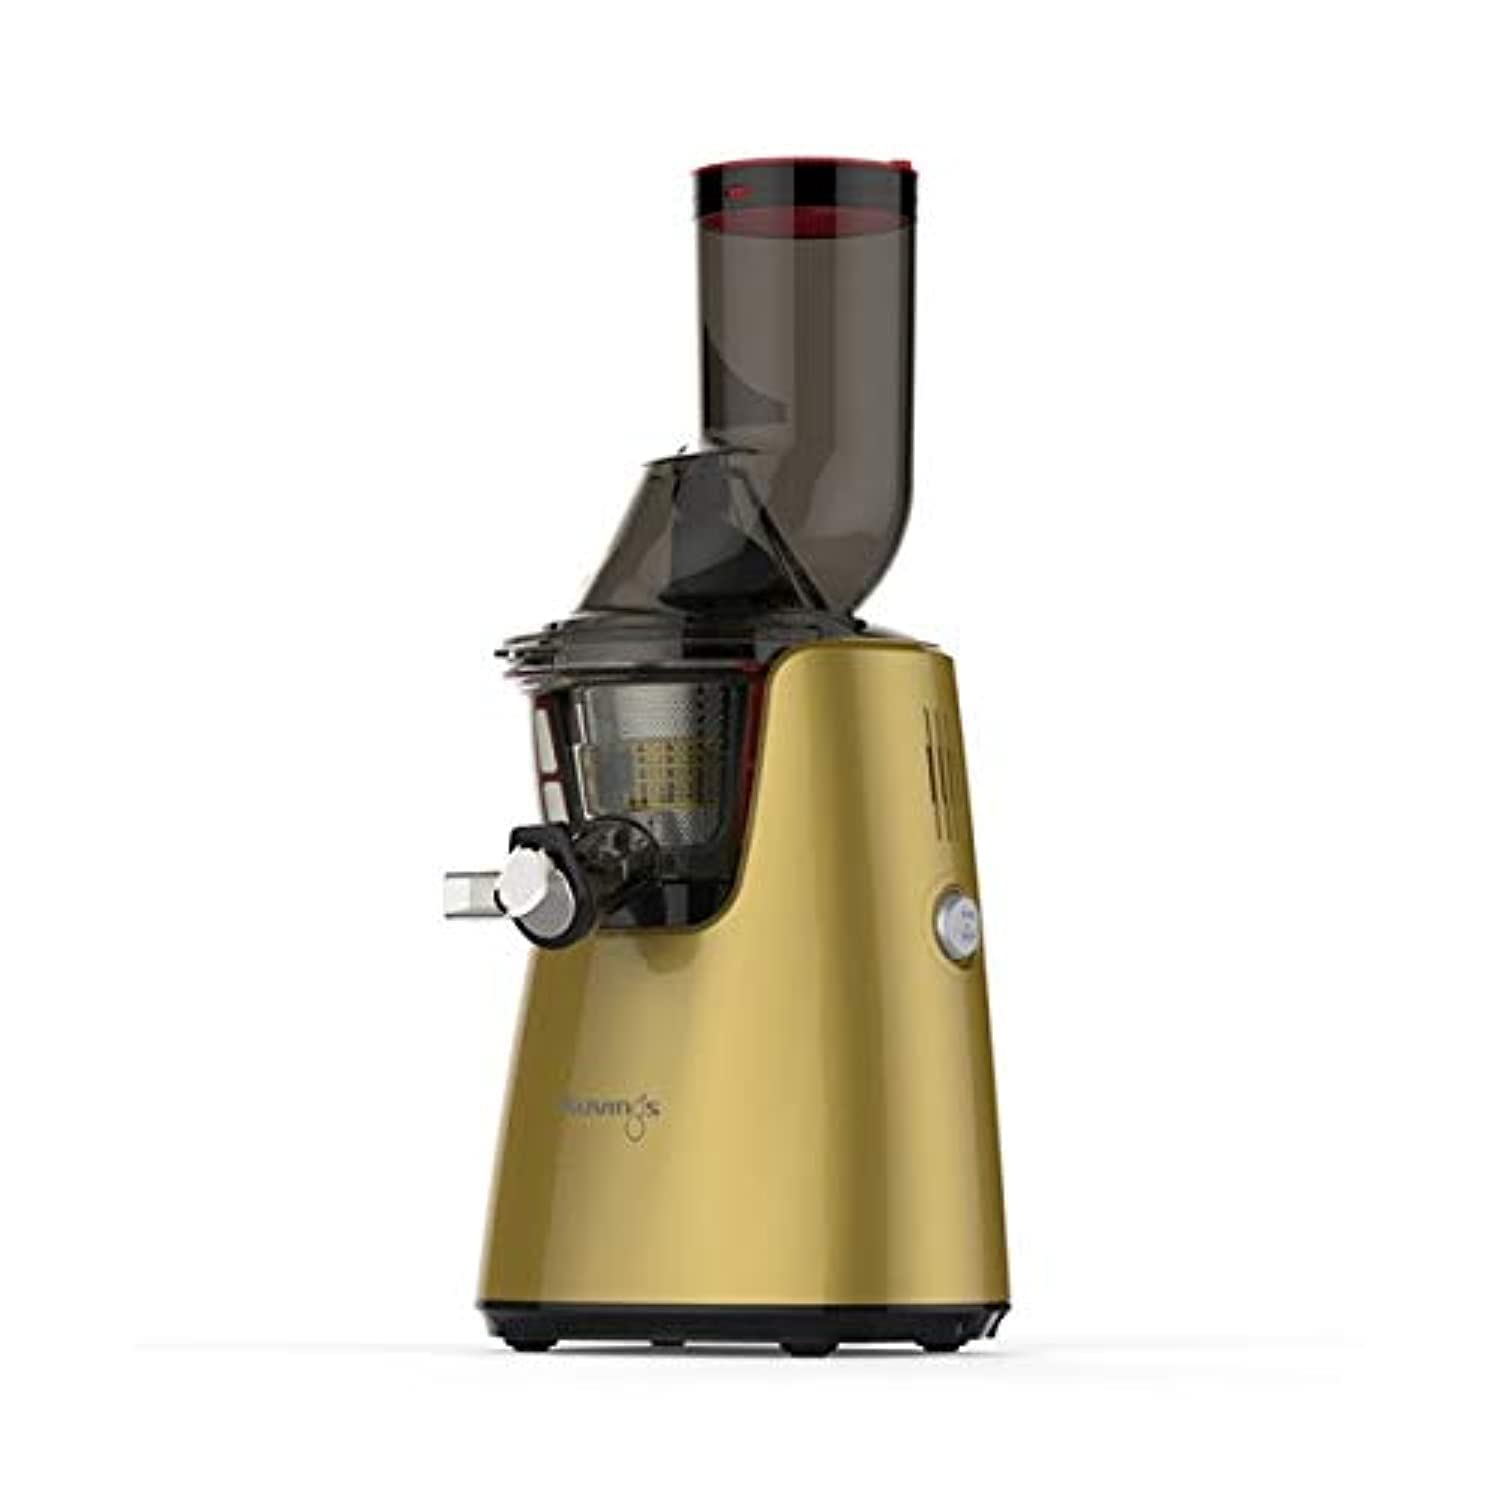 Kuvings C7000 240 W Whole Slow Juicer, Gold, KV-NS723CBC2-GD